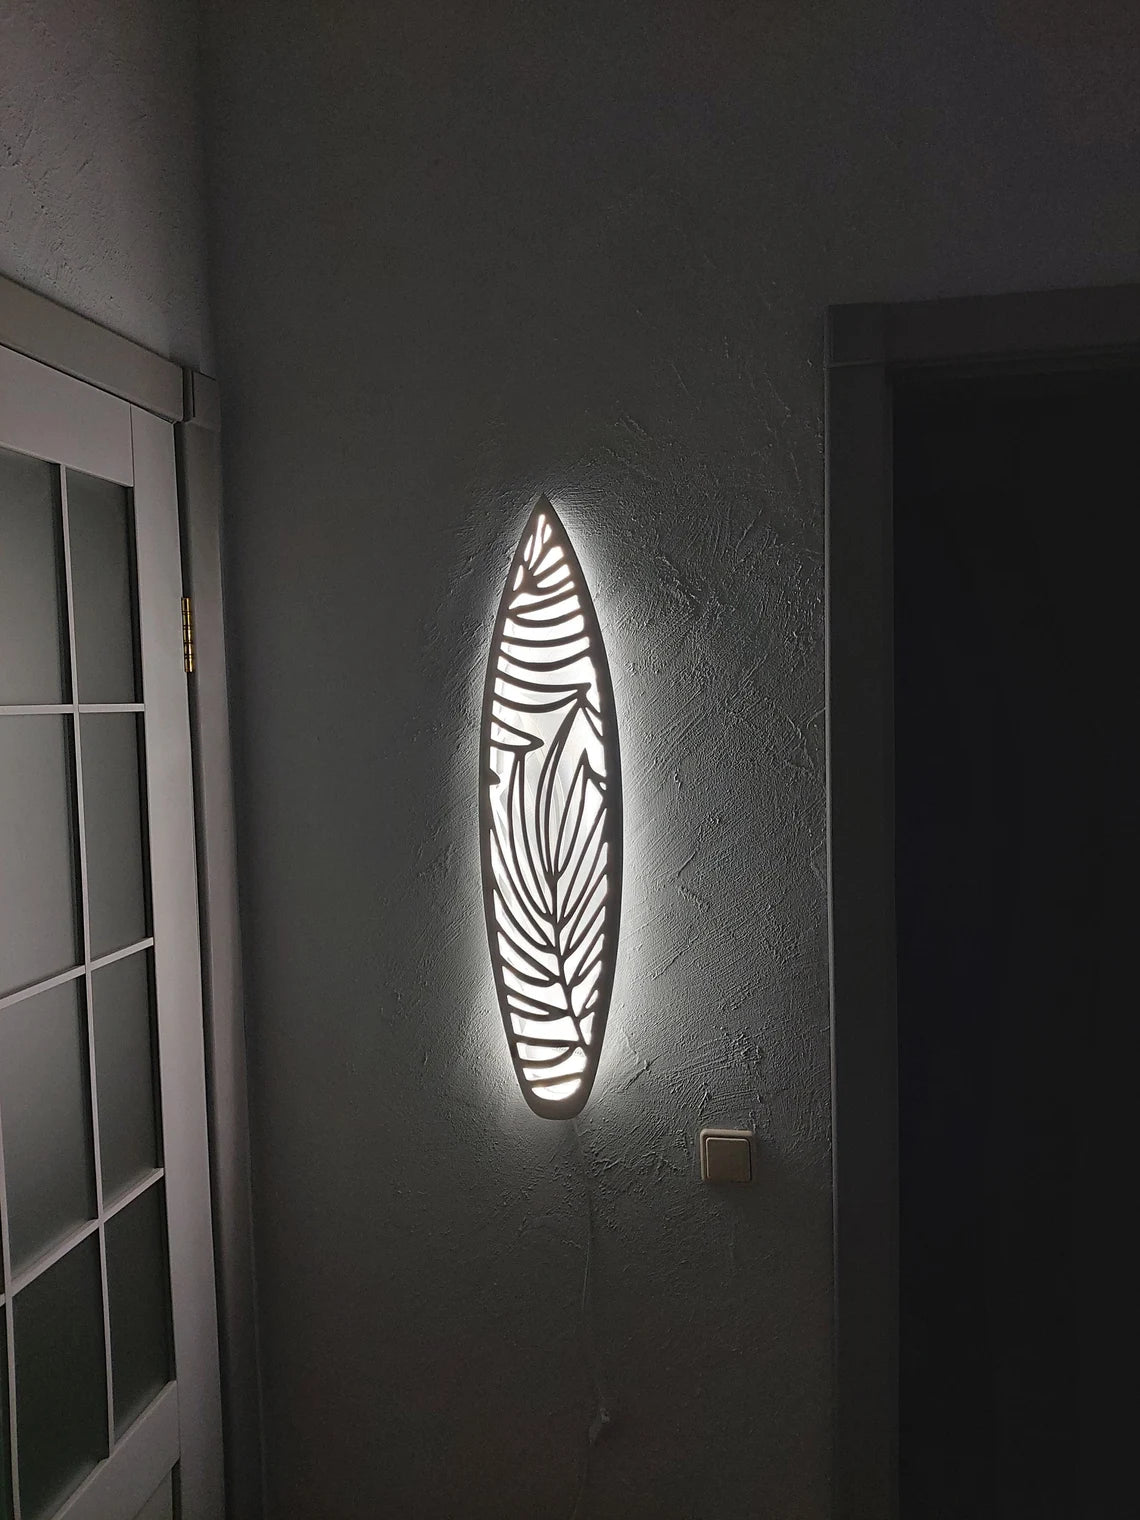 Surfboard Wall Lamp for Home Decor. Lamp Surfboard, Nightlight for Wall Decor. Wooden Lamp of Led, Wall Light, Floor Lamp